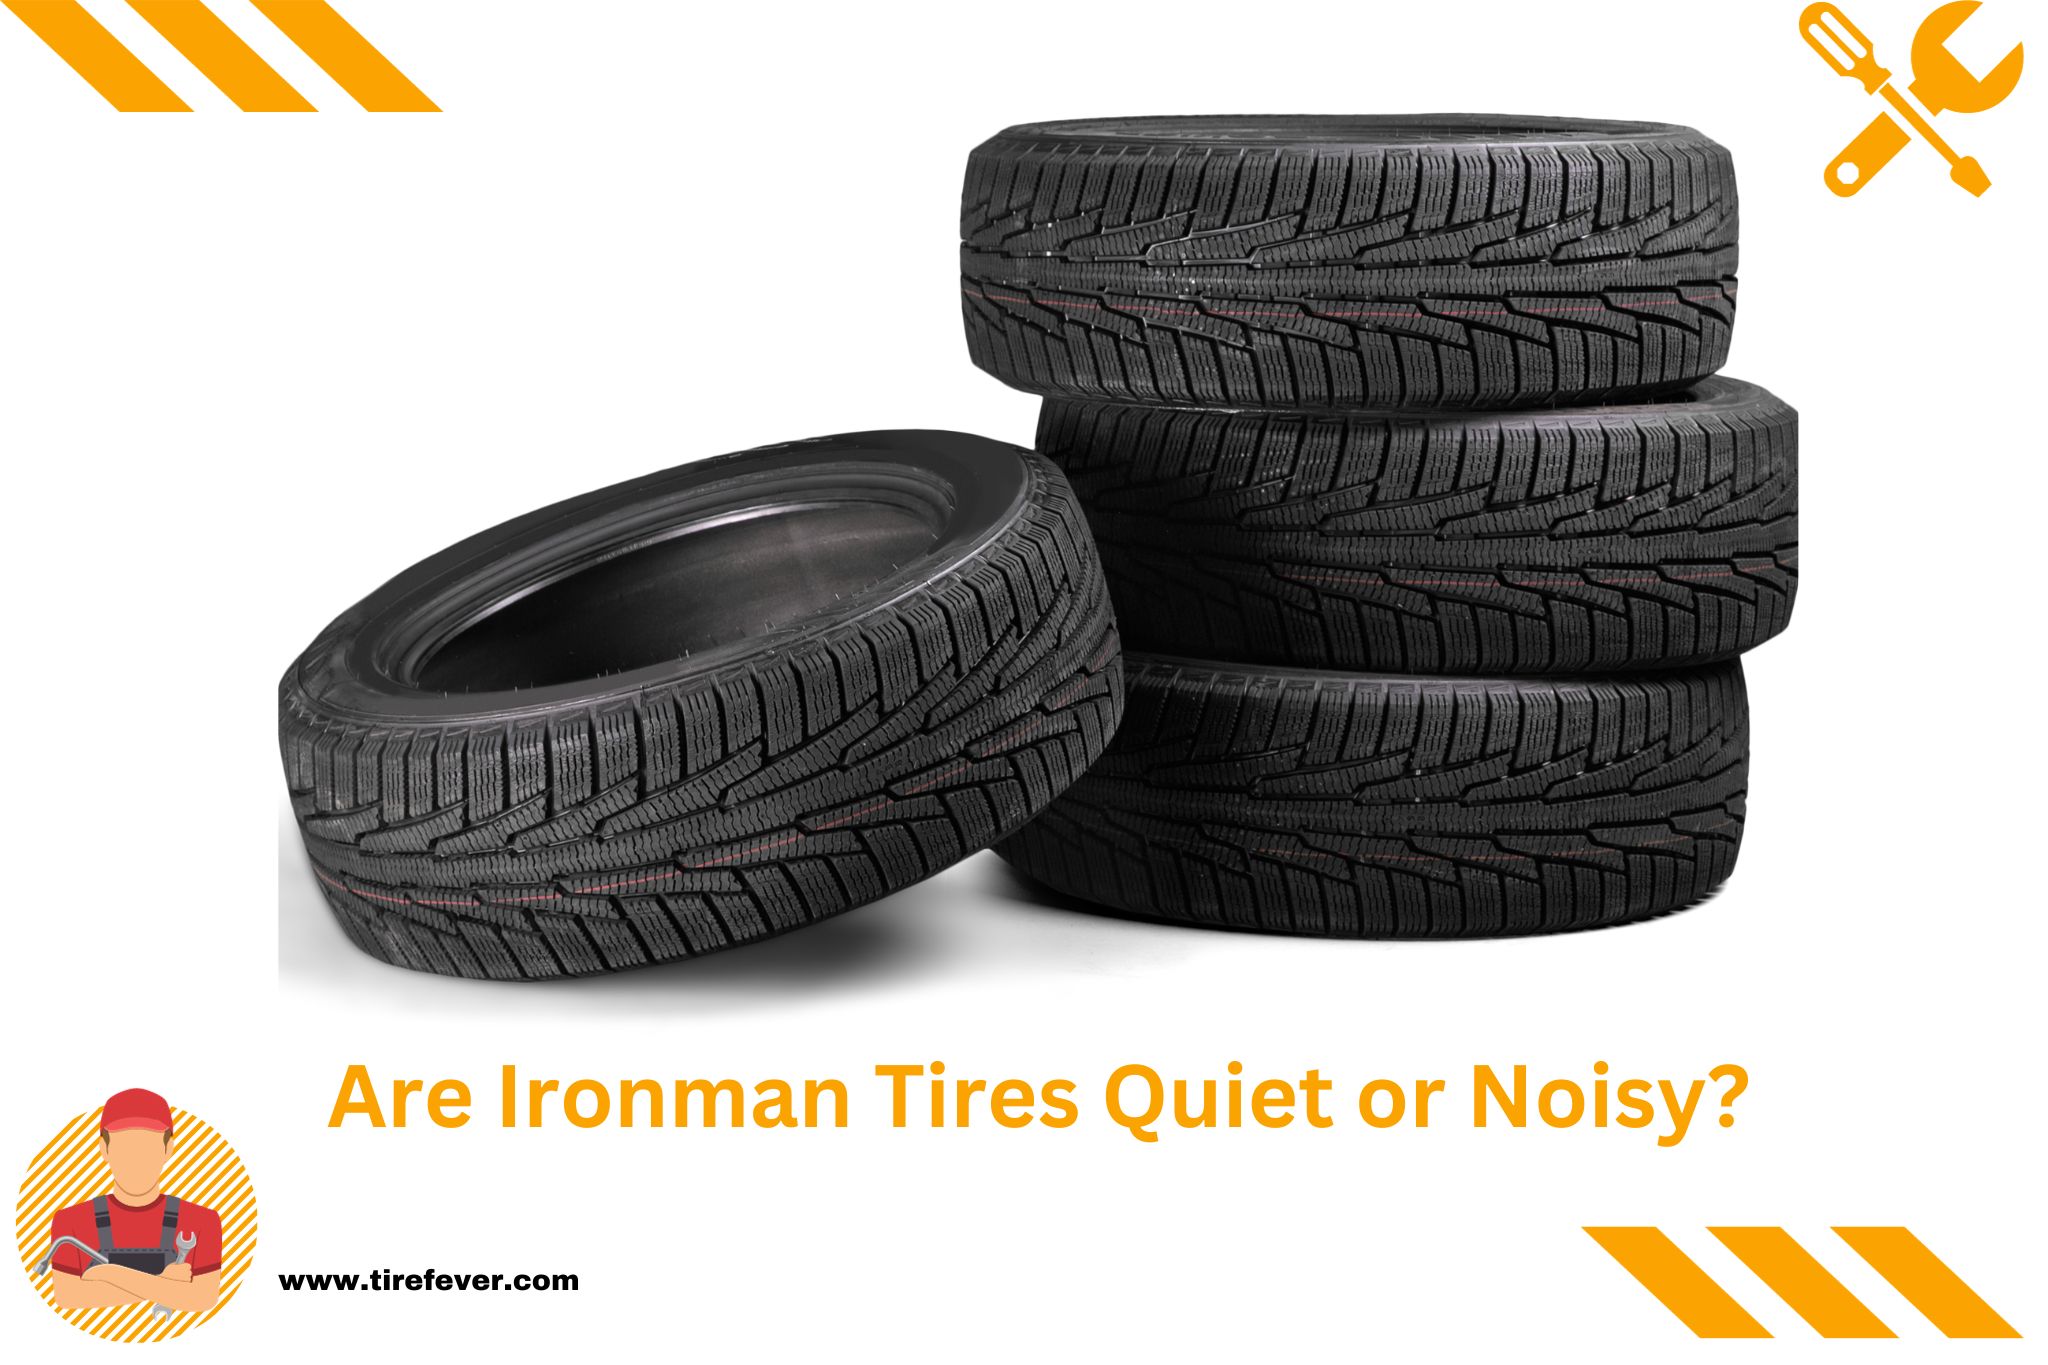 Are Ironman Tires Quiet or Noisy?